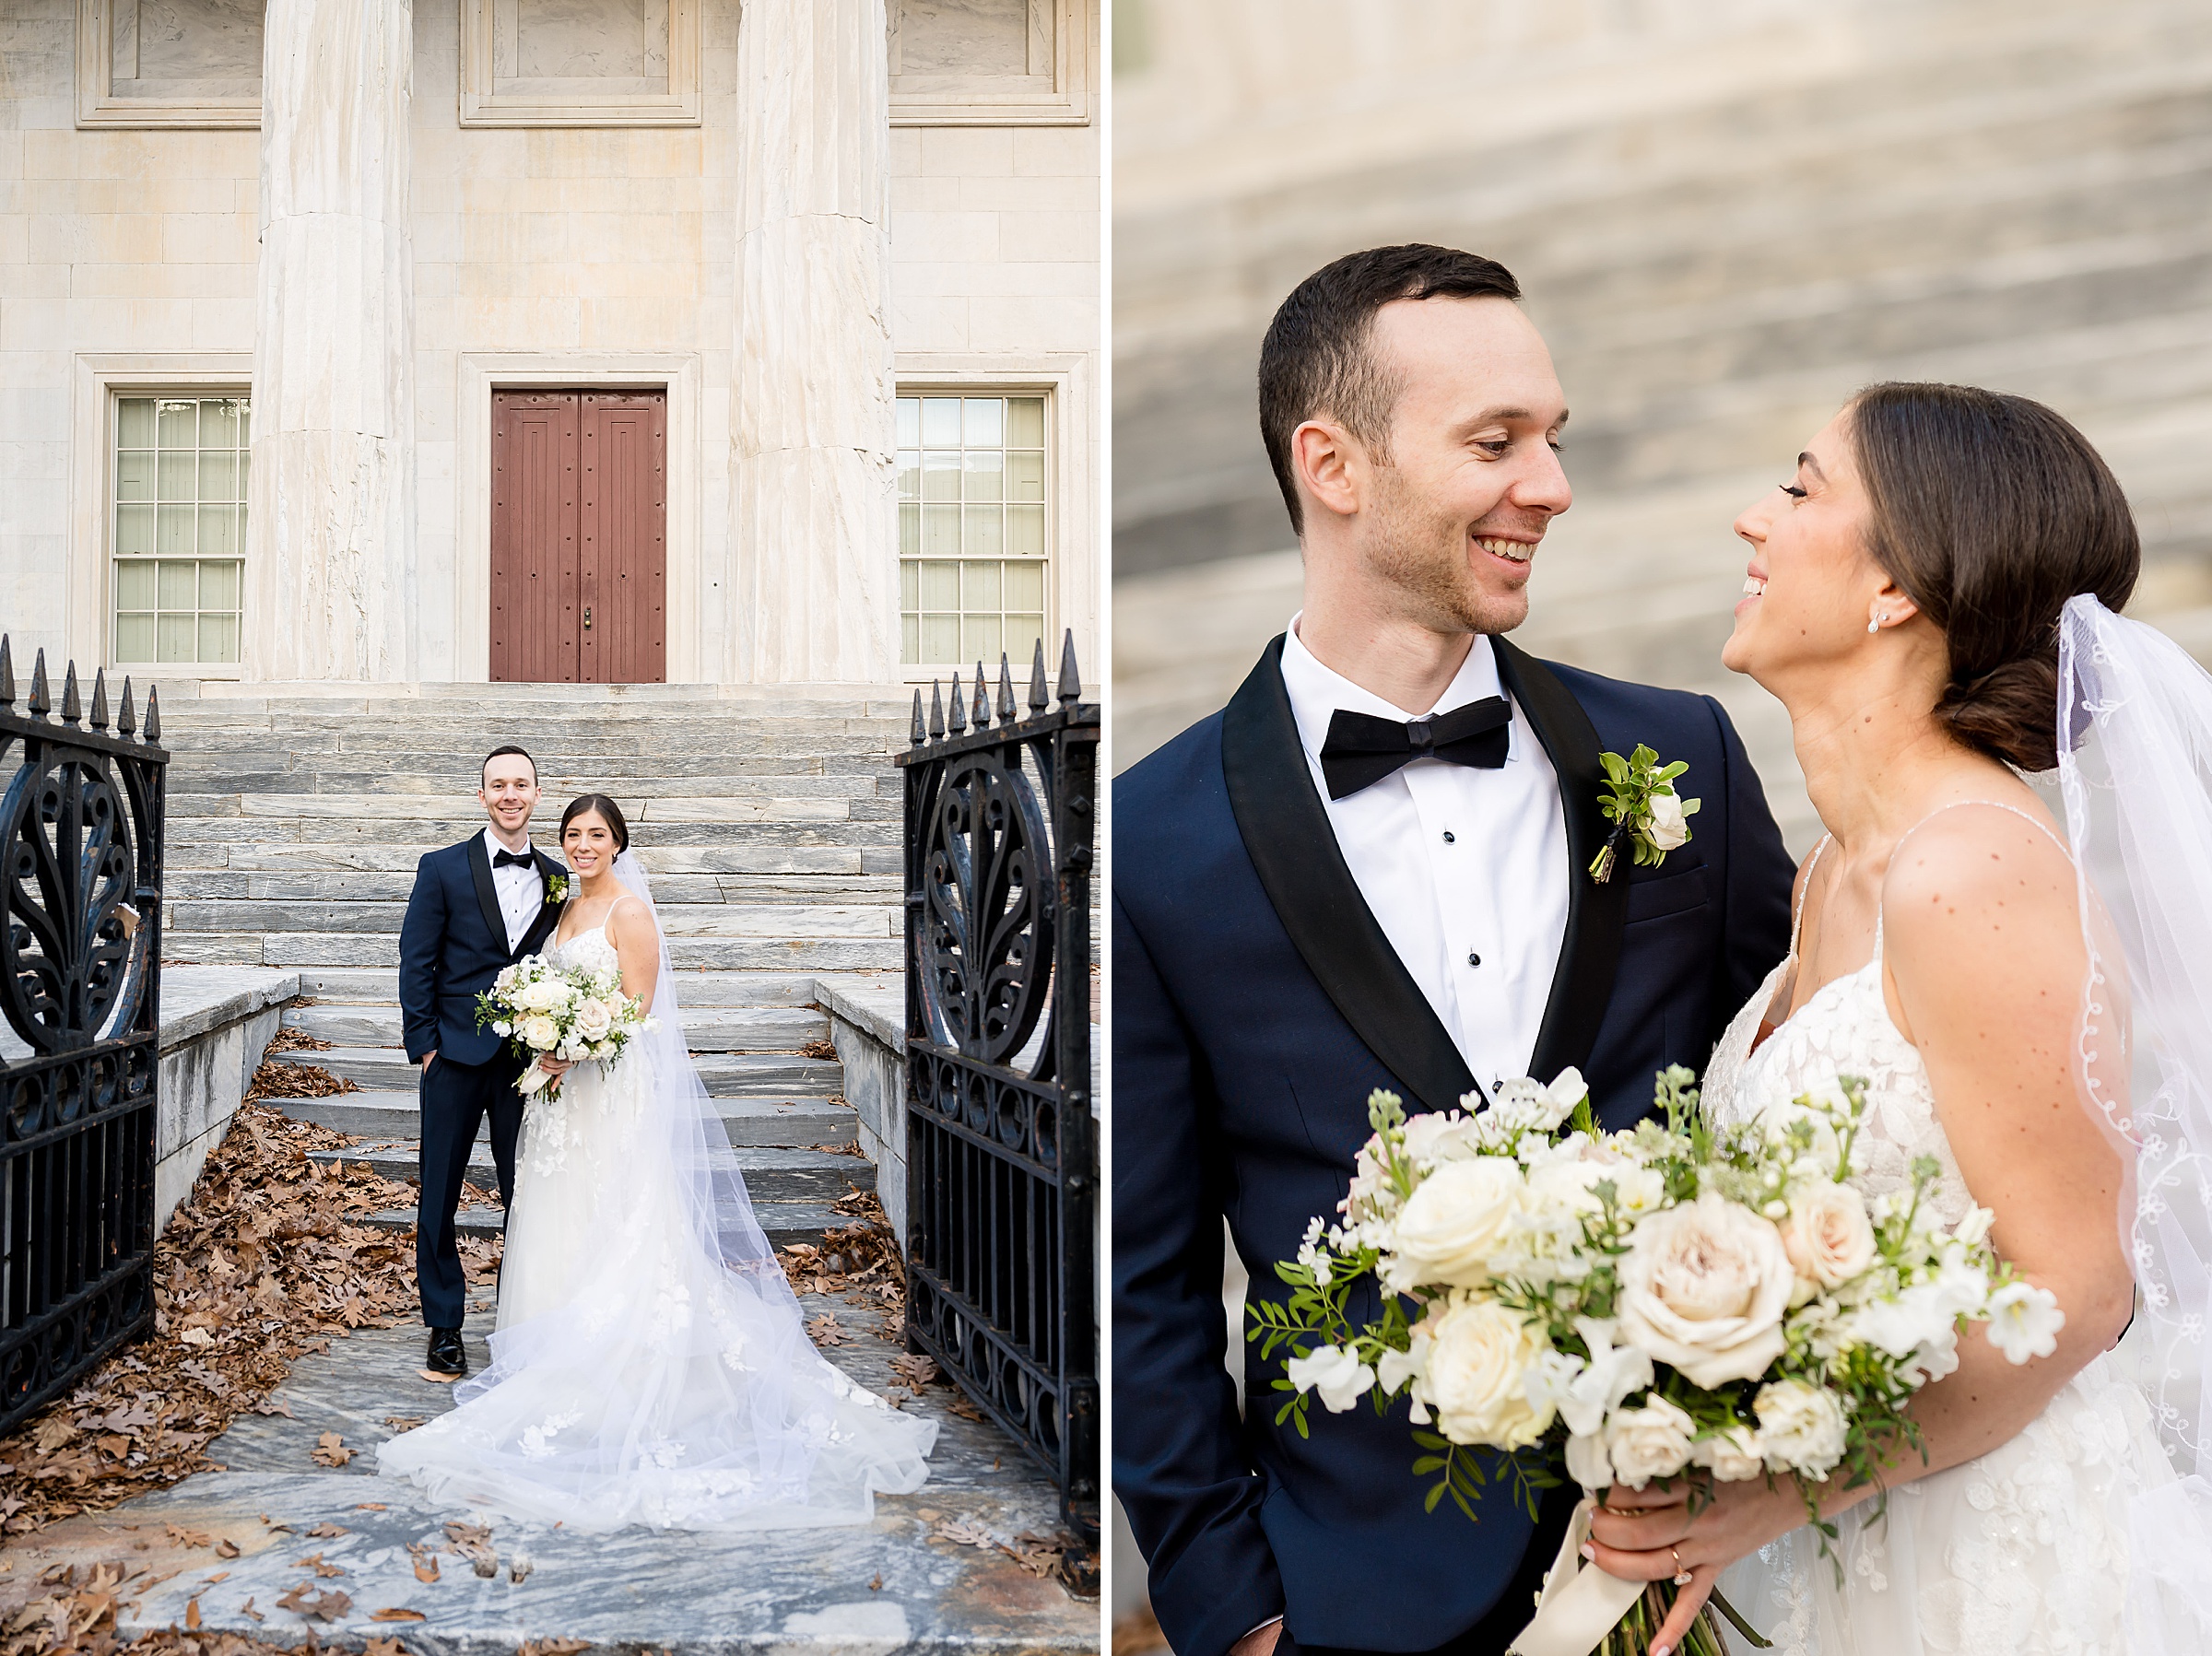 A bride and groom standing on the steps in front of a building, captured by Lilah Events for their wedding day.